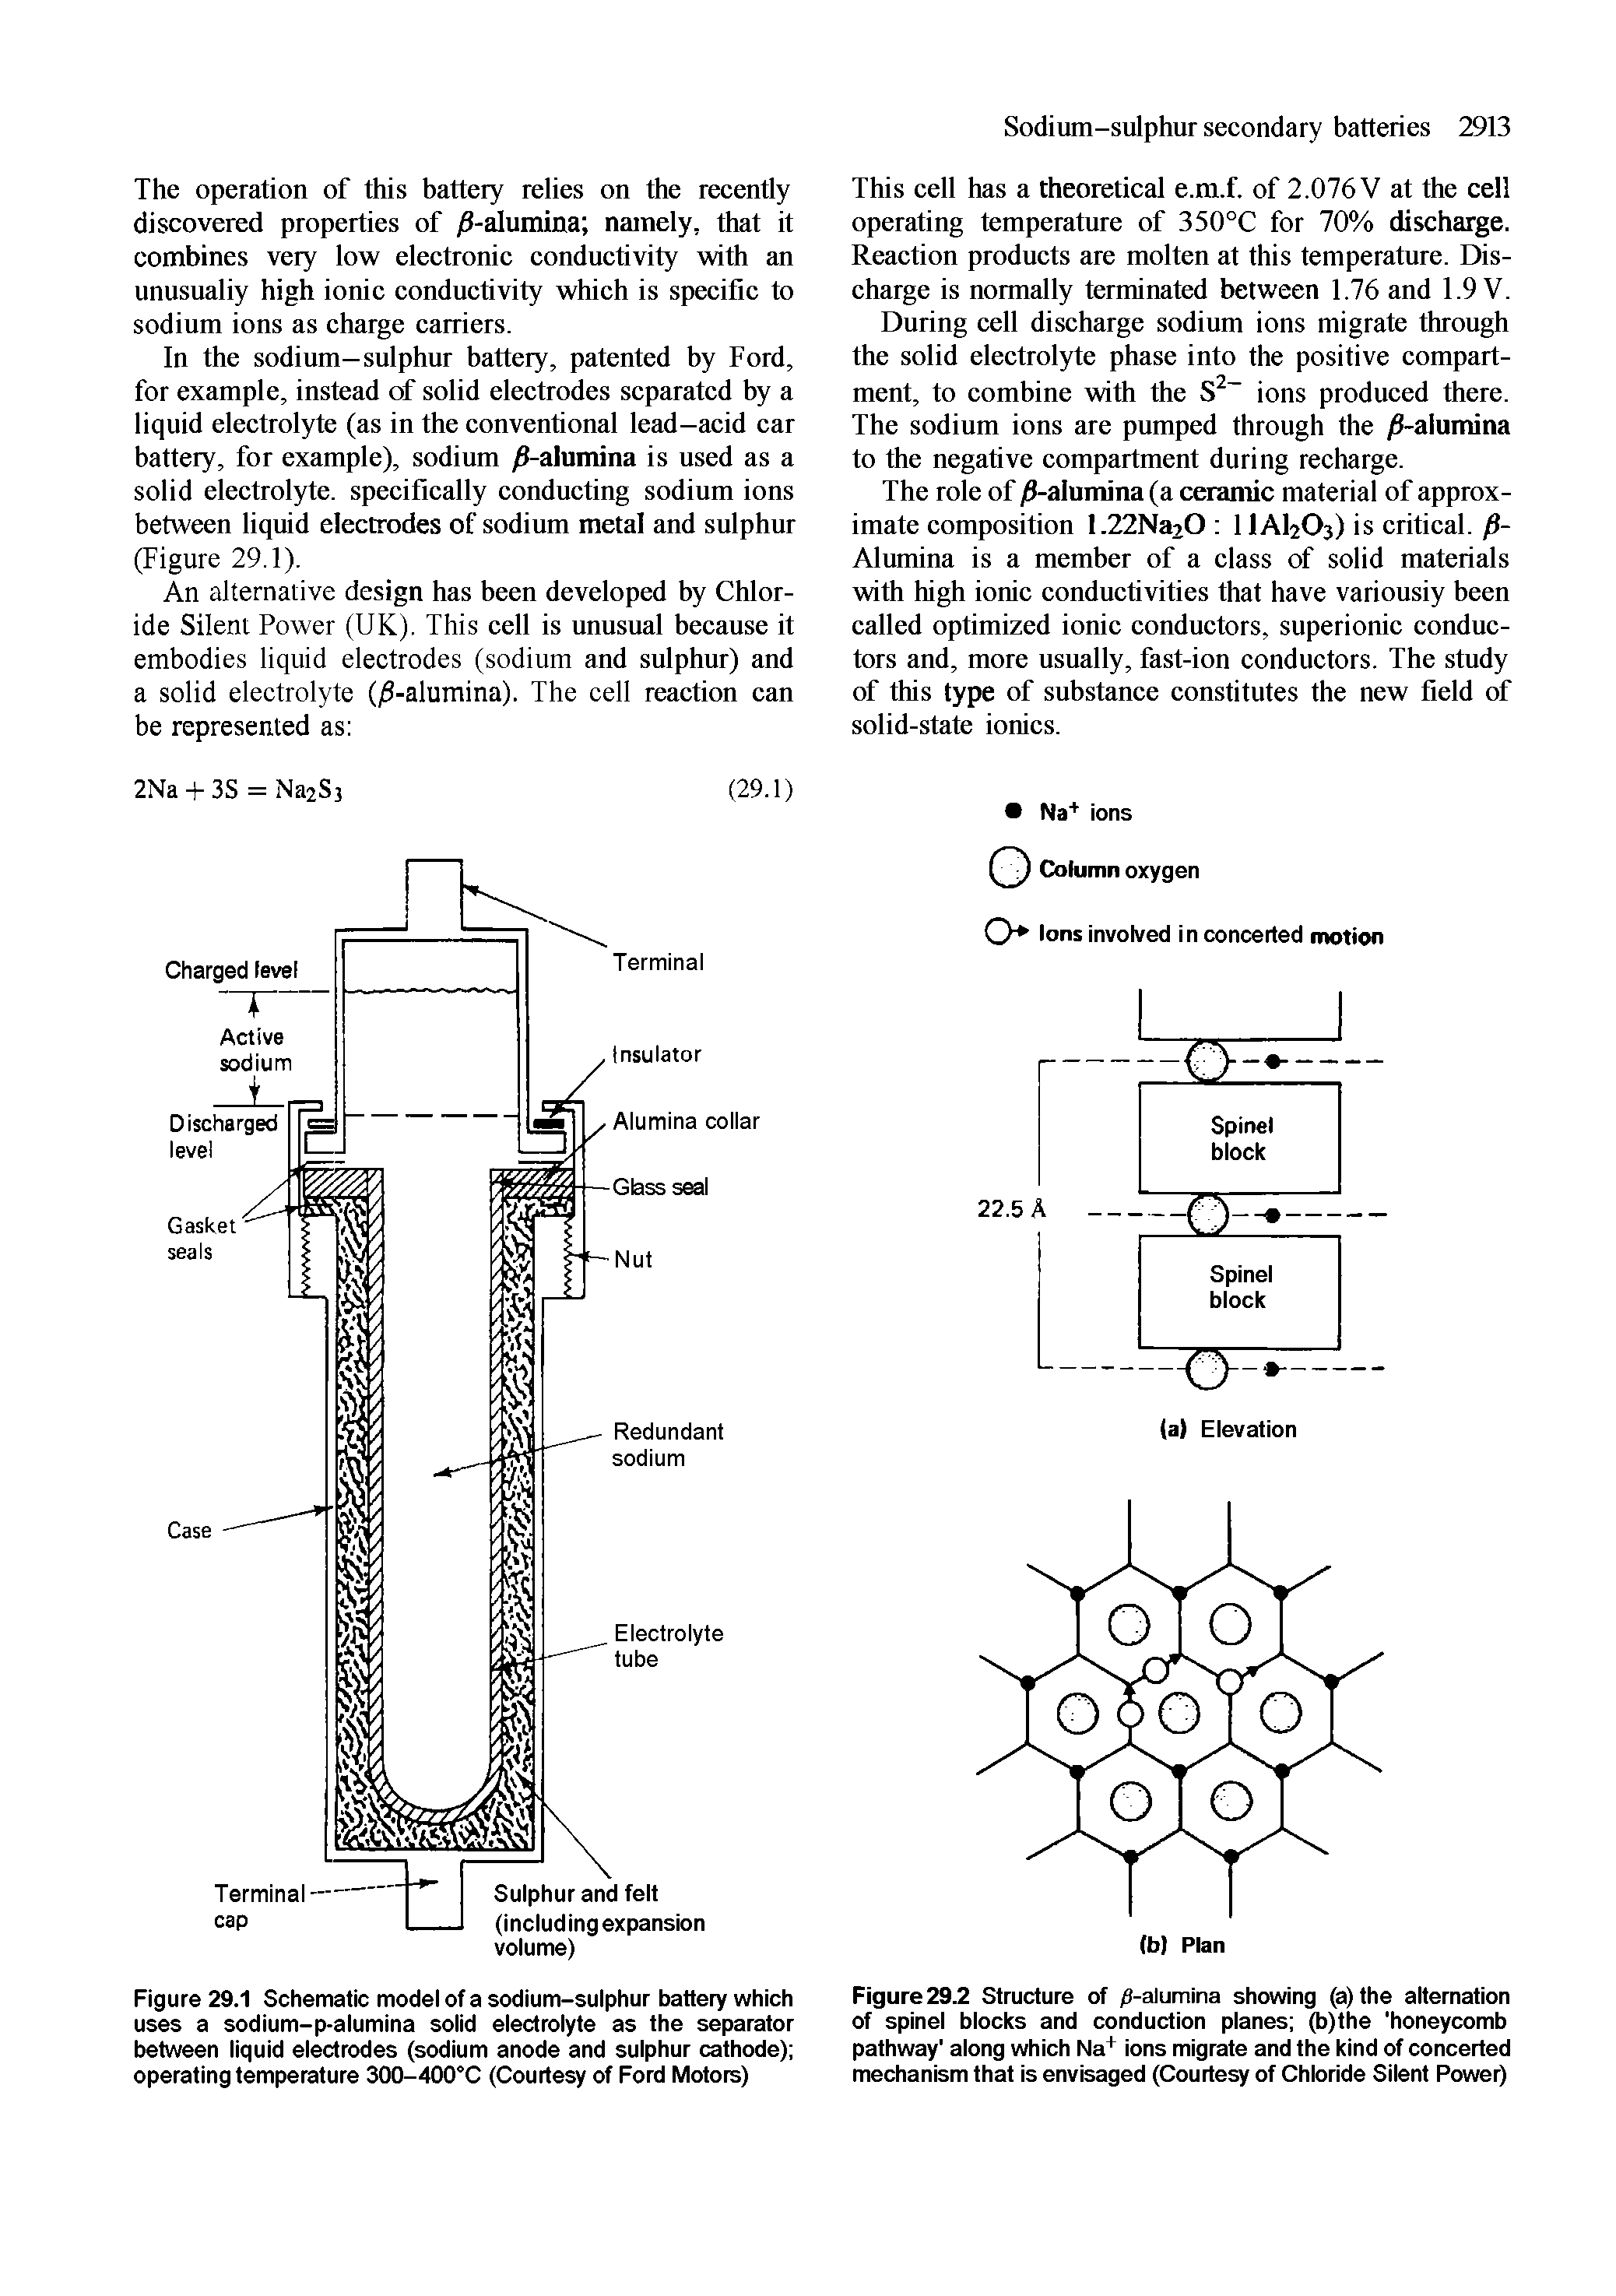 Figure 29.1 Schematic modei of a sodium-suiphur battery which uses a sodium-p-aiumina soiid eiectroiyte as the separator between iiquid eiectrodes (sodium anode and suiphur cathode) operating temperature 300-400°C (Courtesy of Ford Motors)...